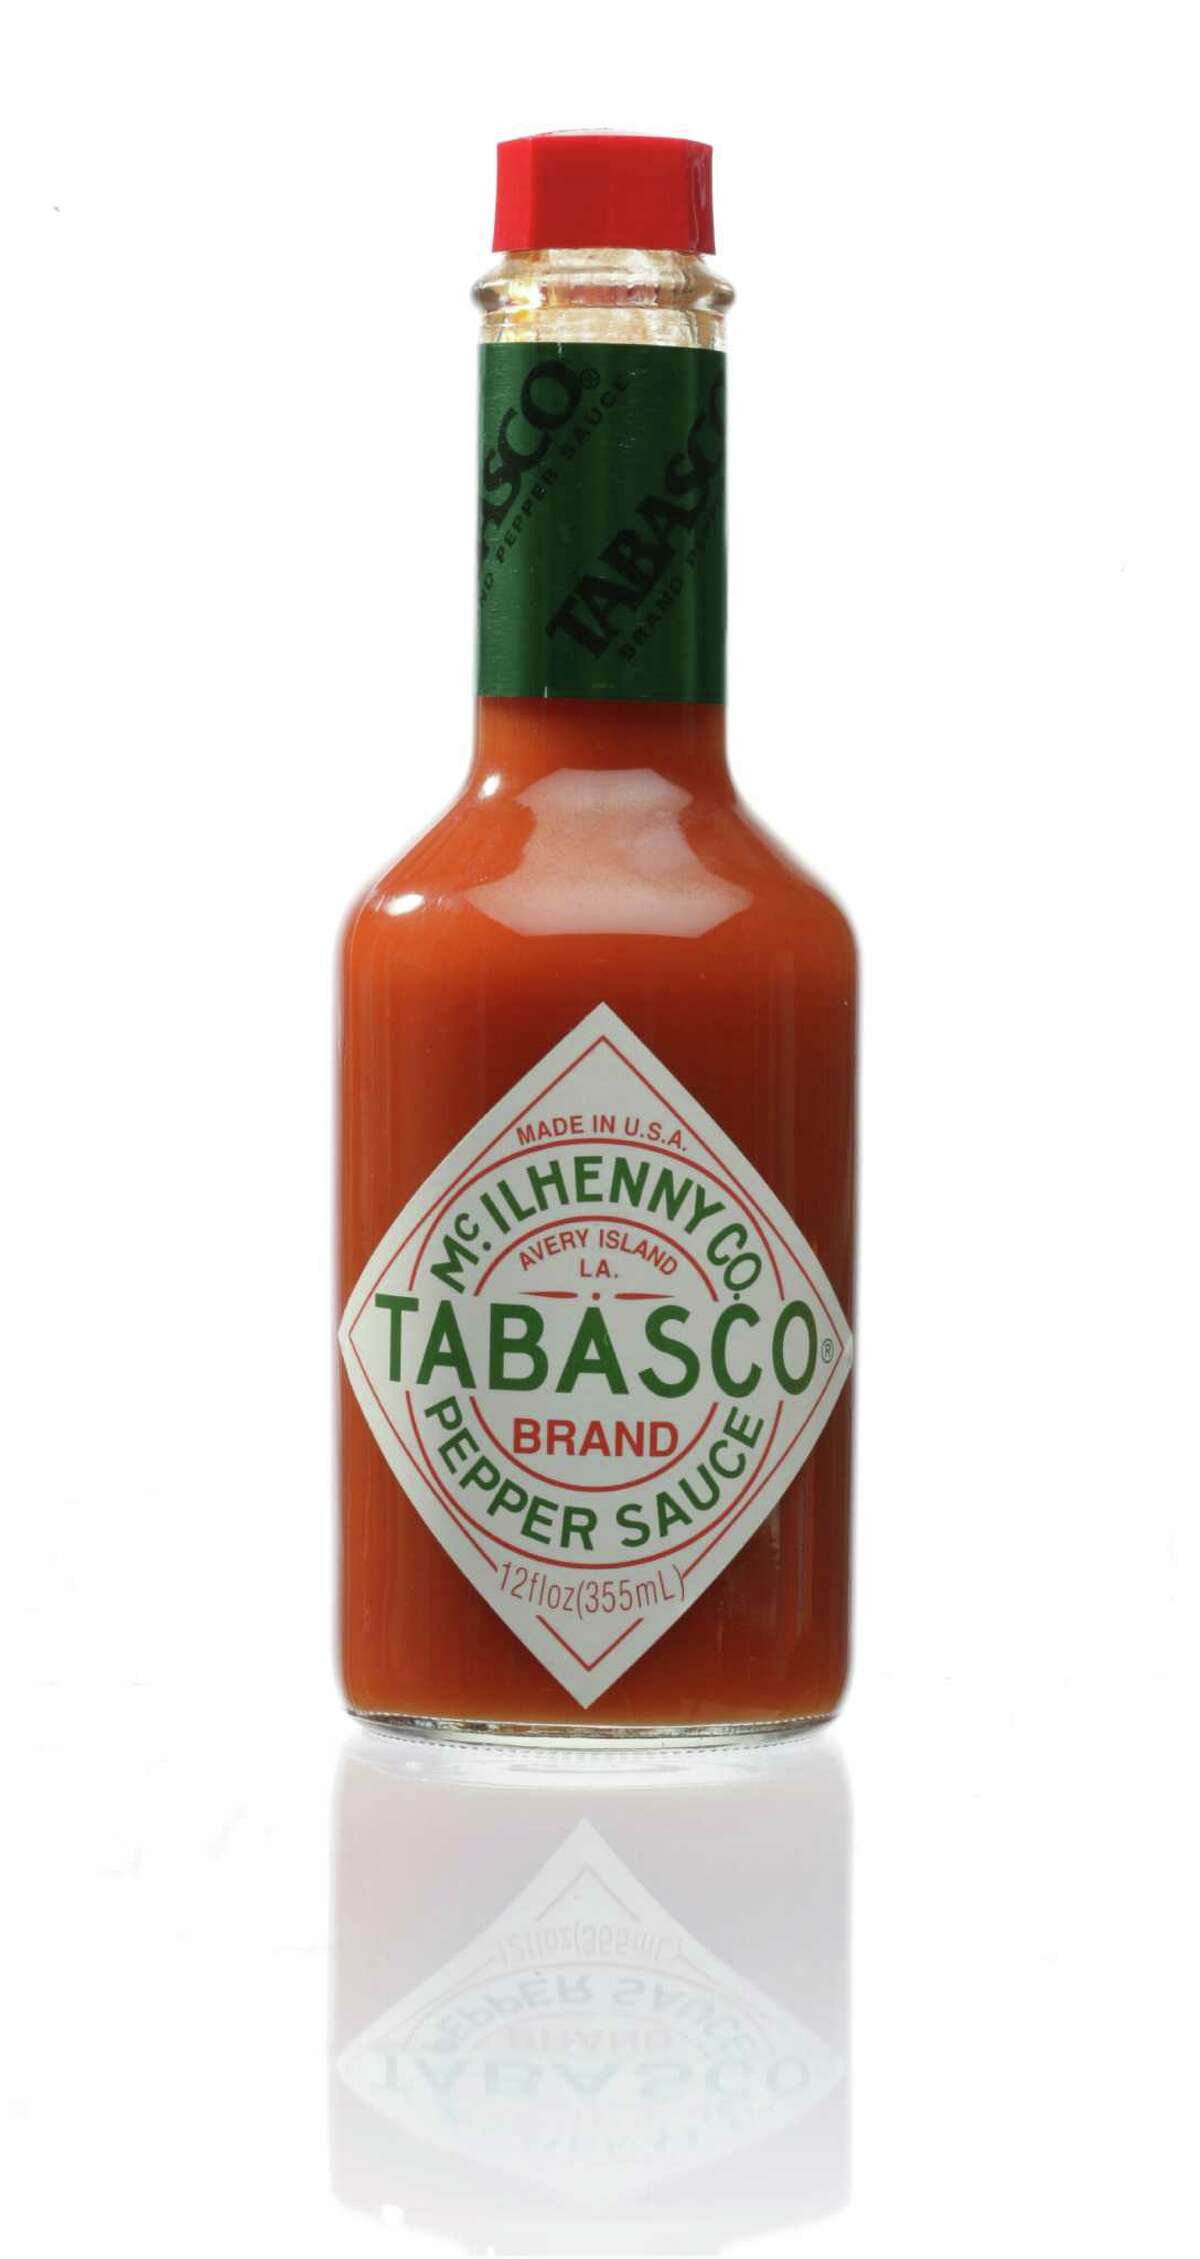 Original Tabasco sauce This clocks in at at between 2,500 and 5,000 Scoville units.